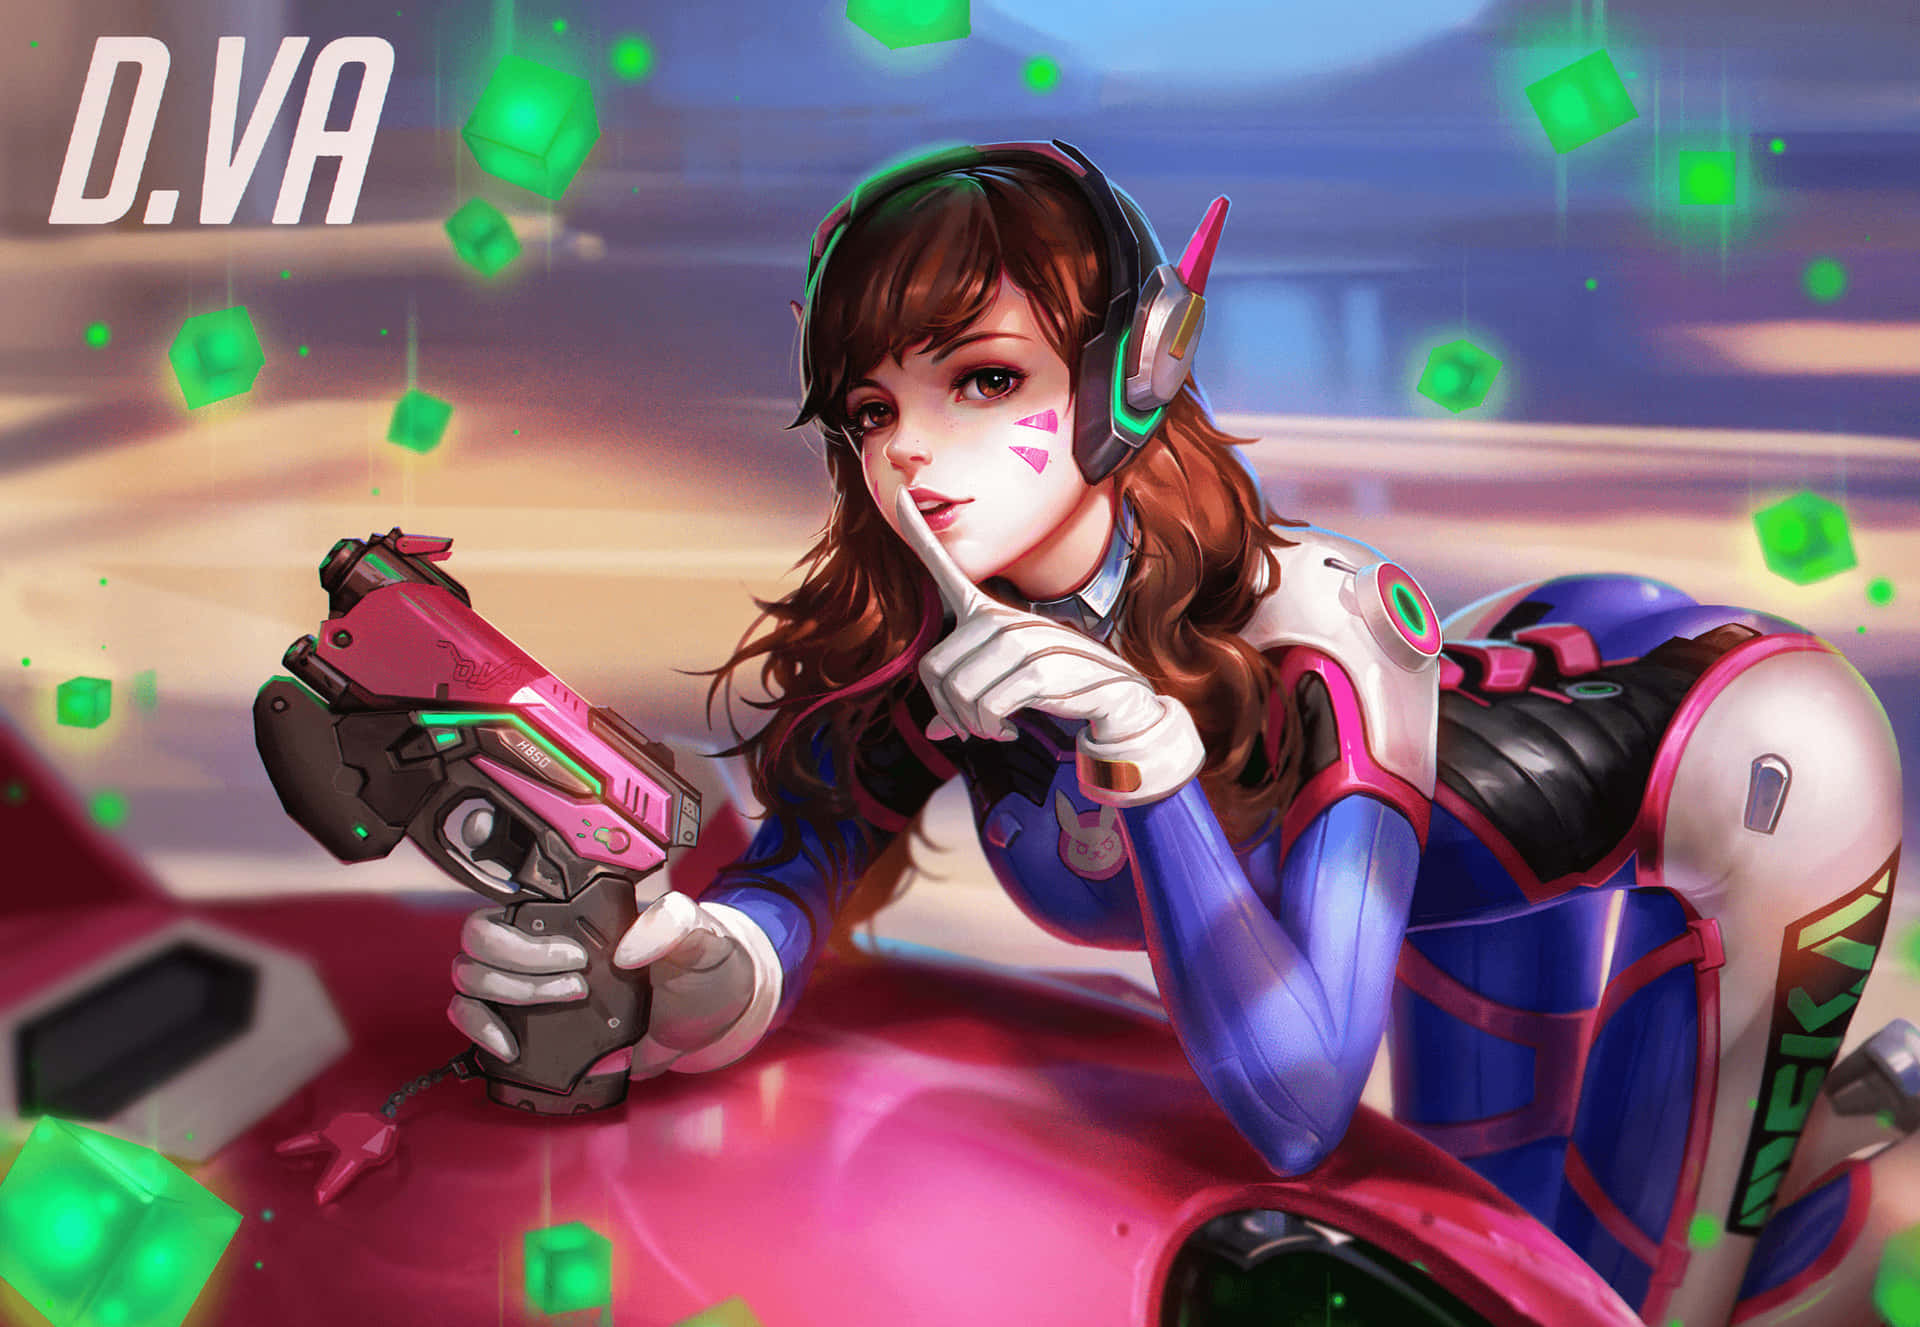 100+] Dva Overwatch Background s for FREE 